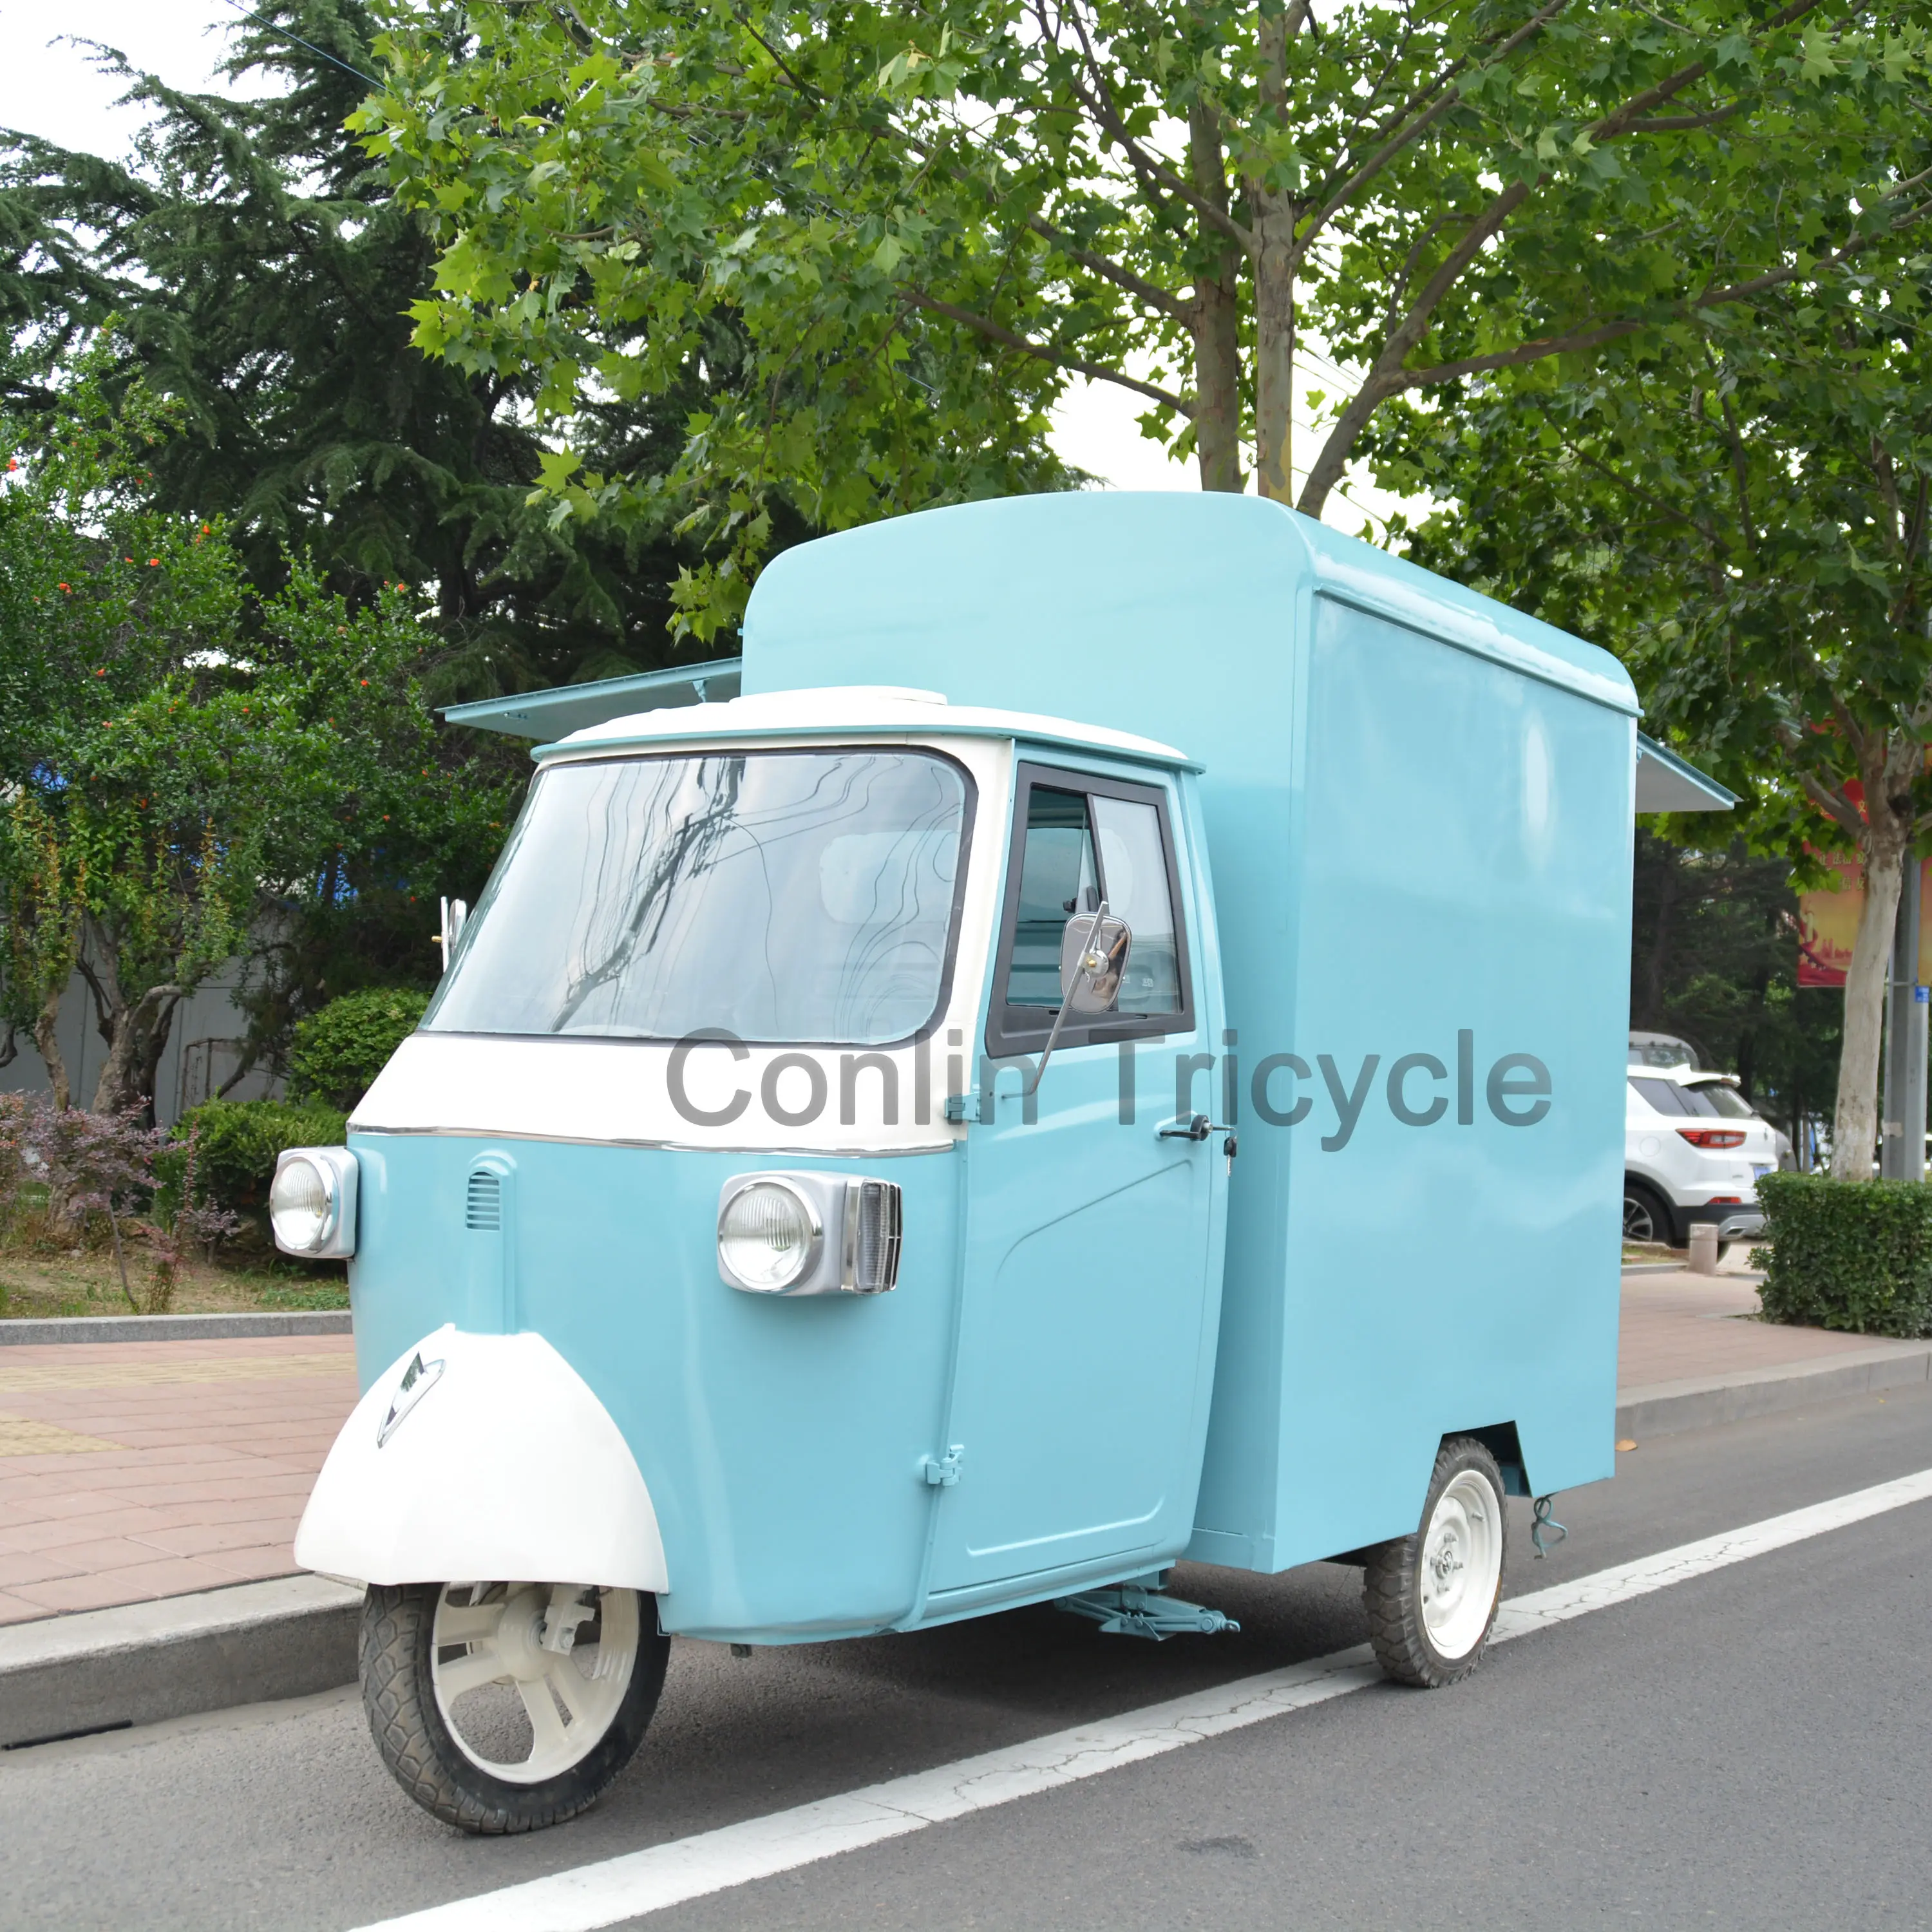 Buy a vintage tuk tuk electric food truck 3 wheel electric car to start your mobile business